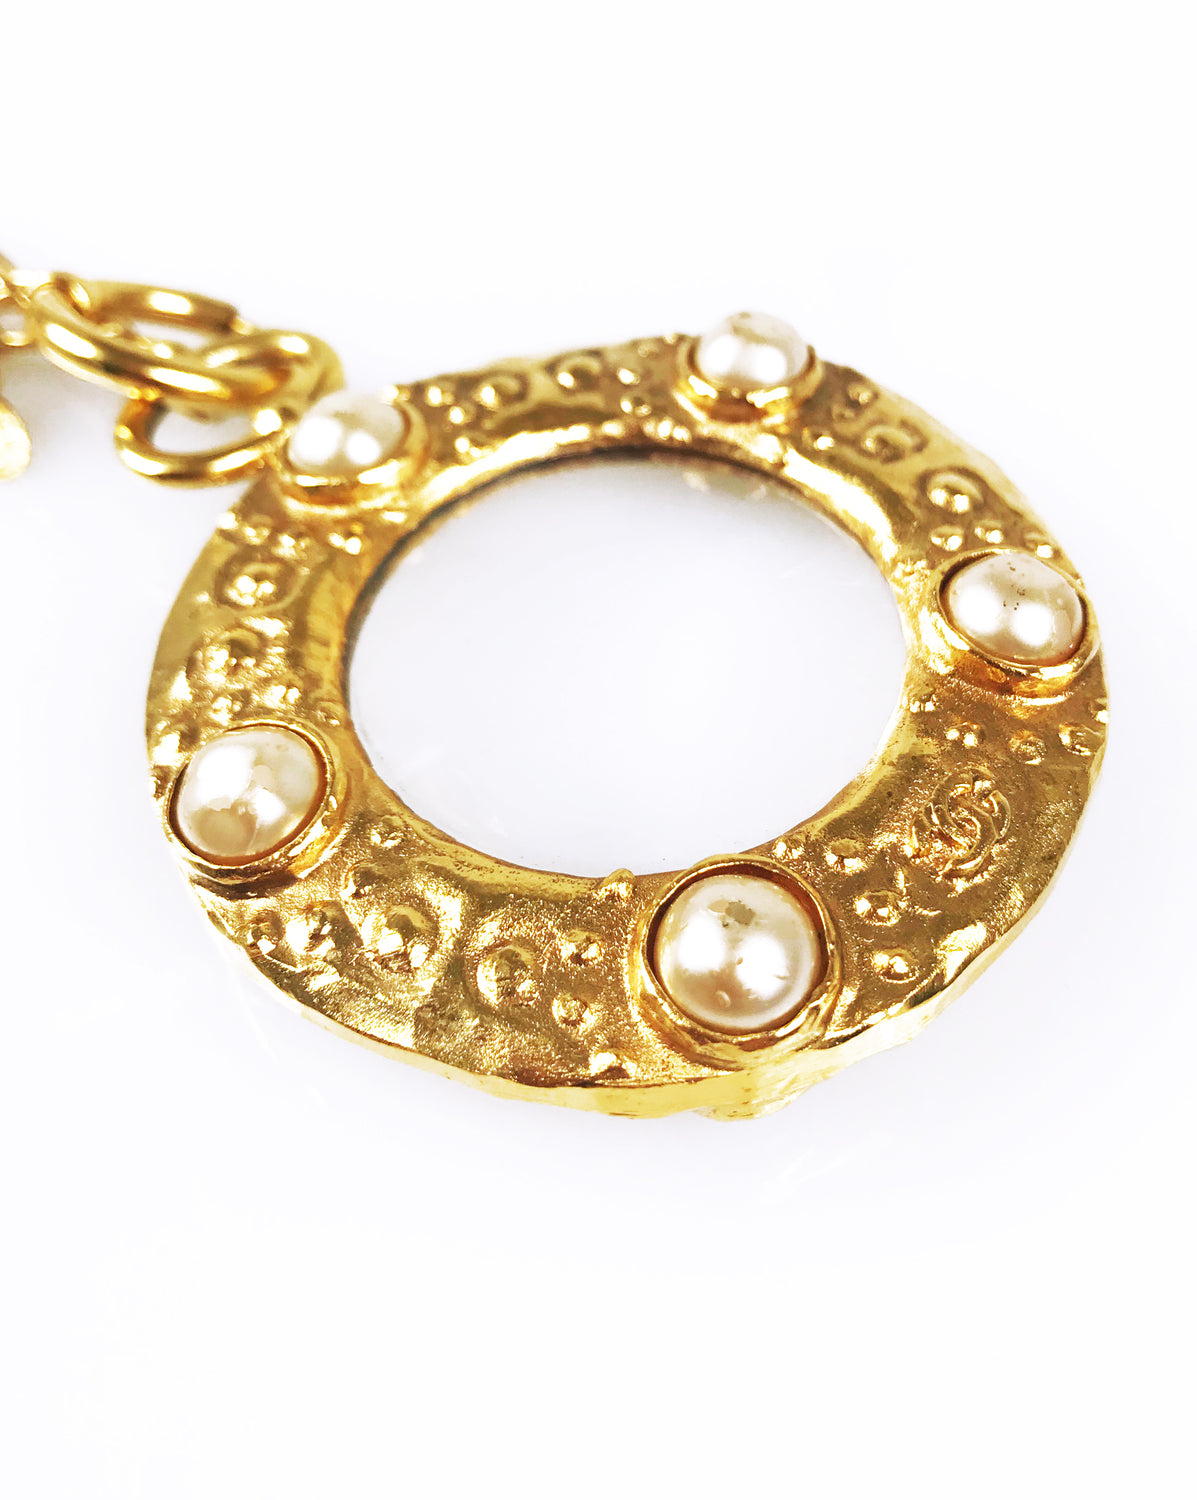 The most incredible vintage Chanel jewelry from the 1980s and 1990s